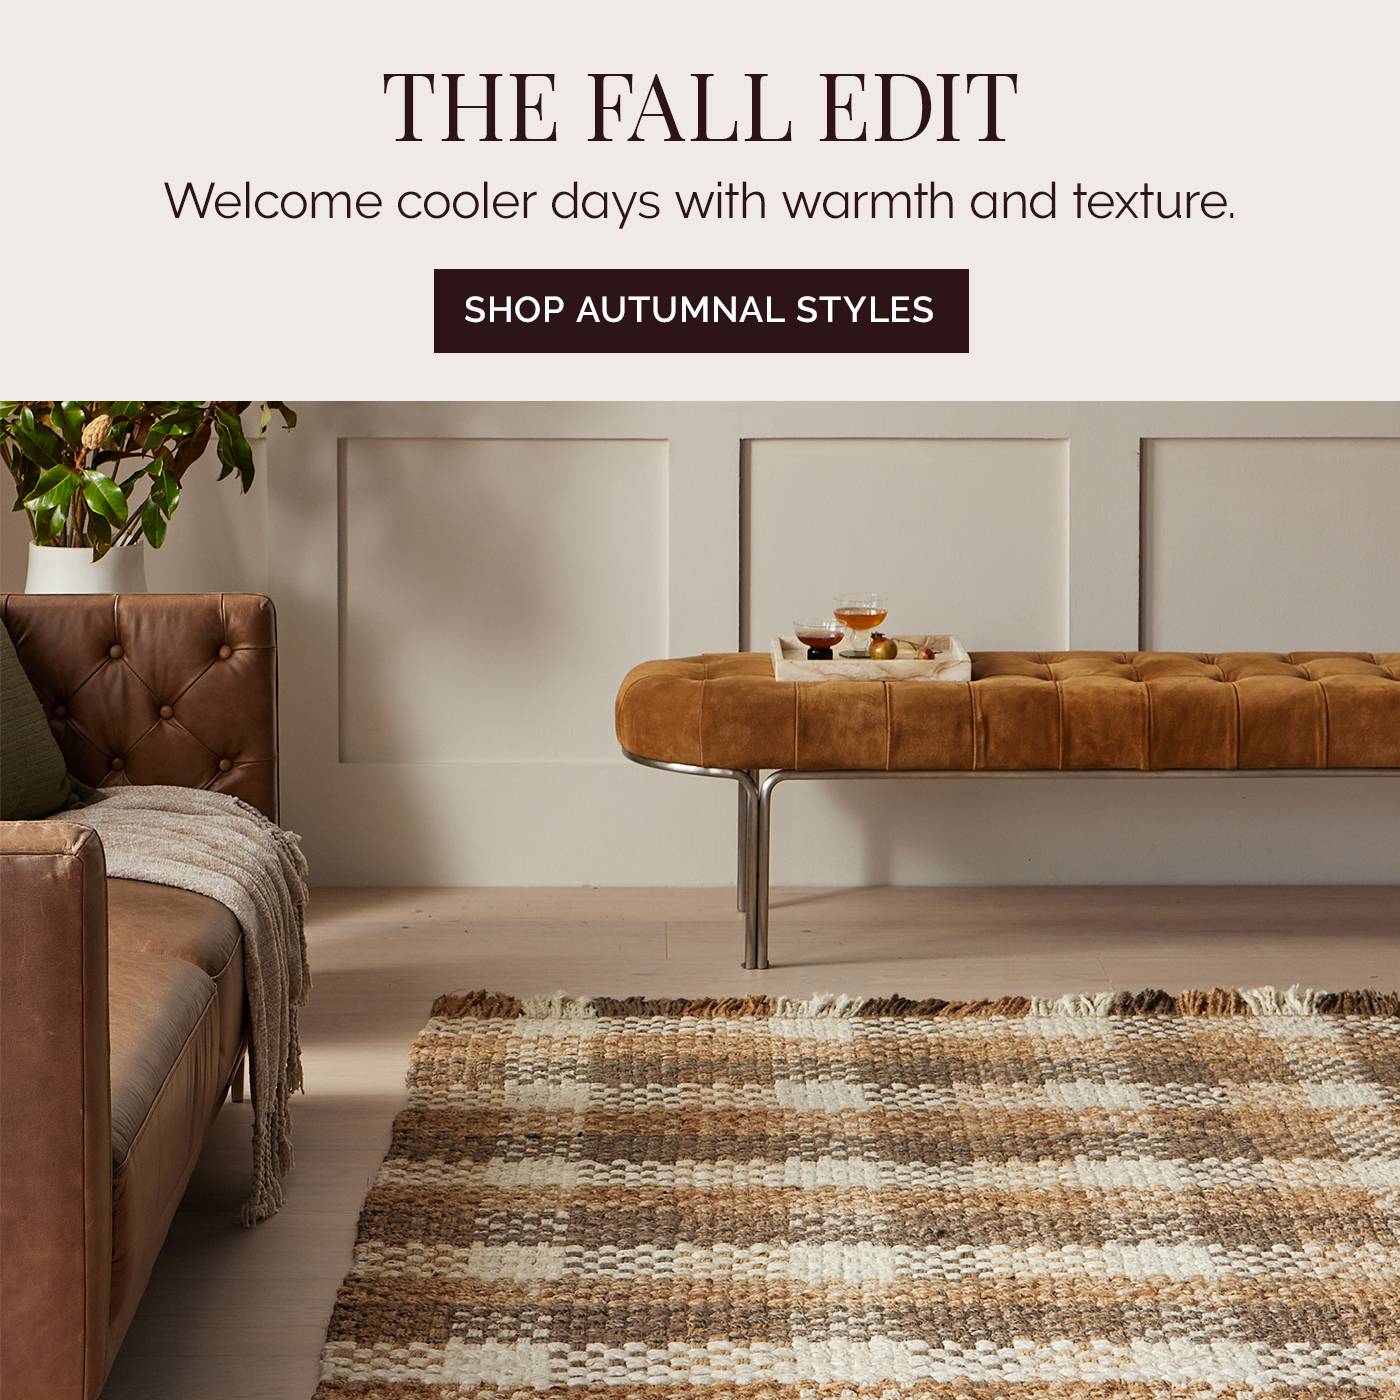 The Fall Edit Banner